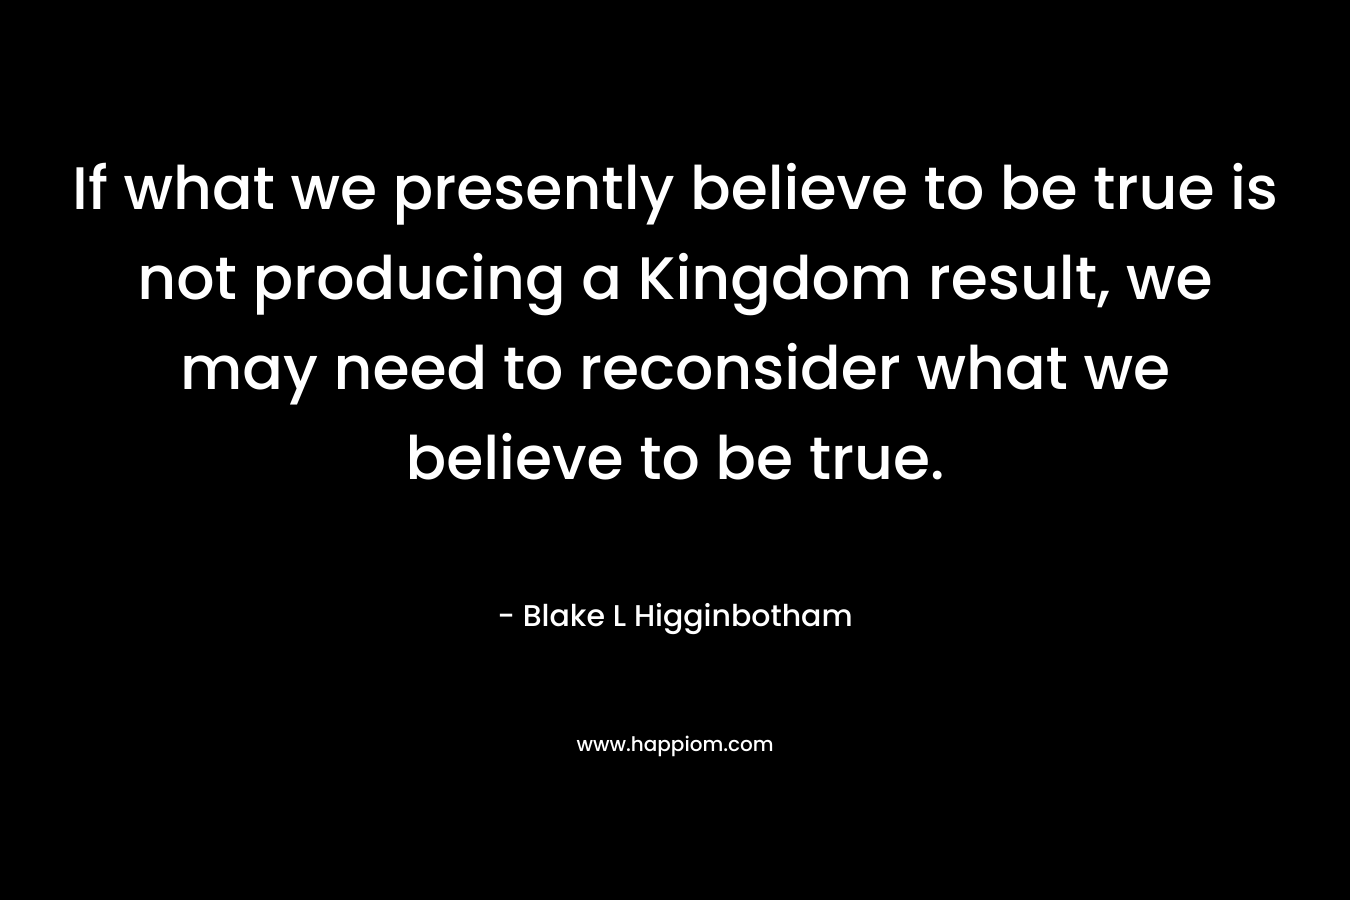 If what we presently believe to be true is not producing a Kingdom result, we may need to reconsider what we believe to be true. – Blake L Higginbotham